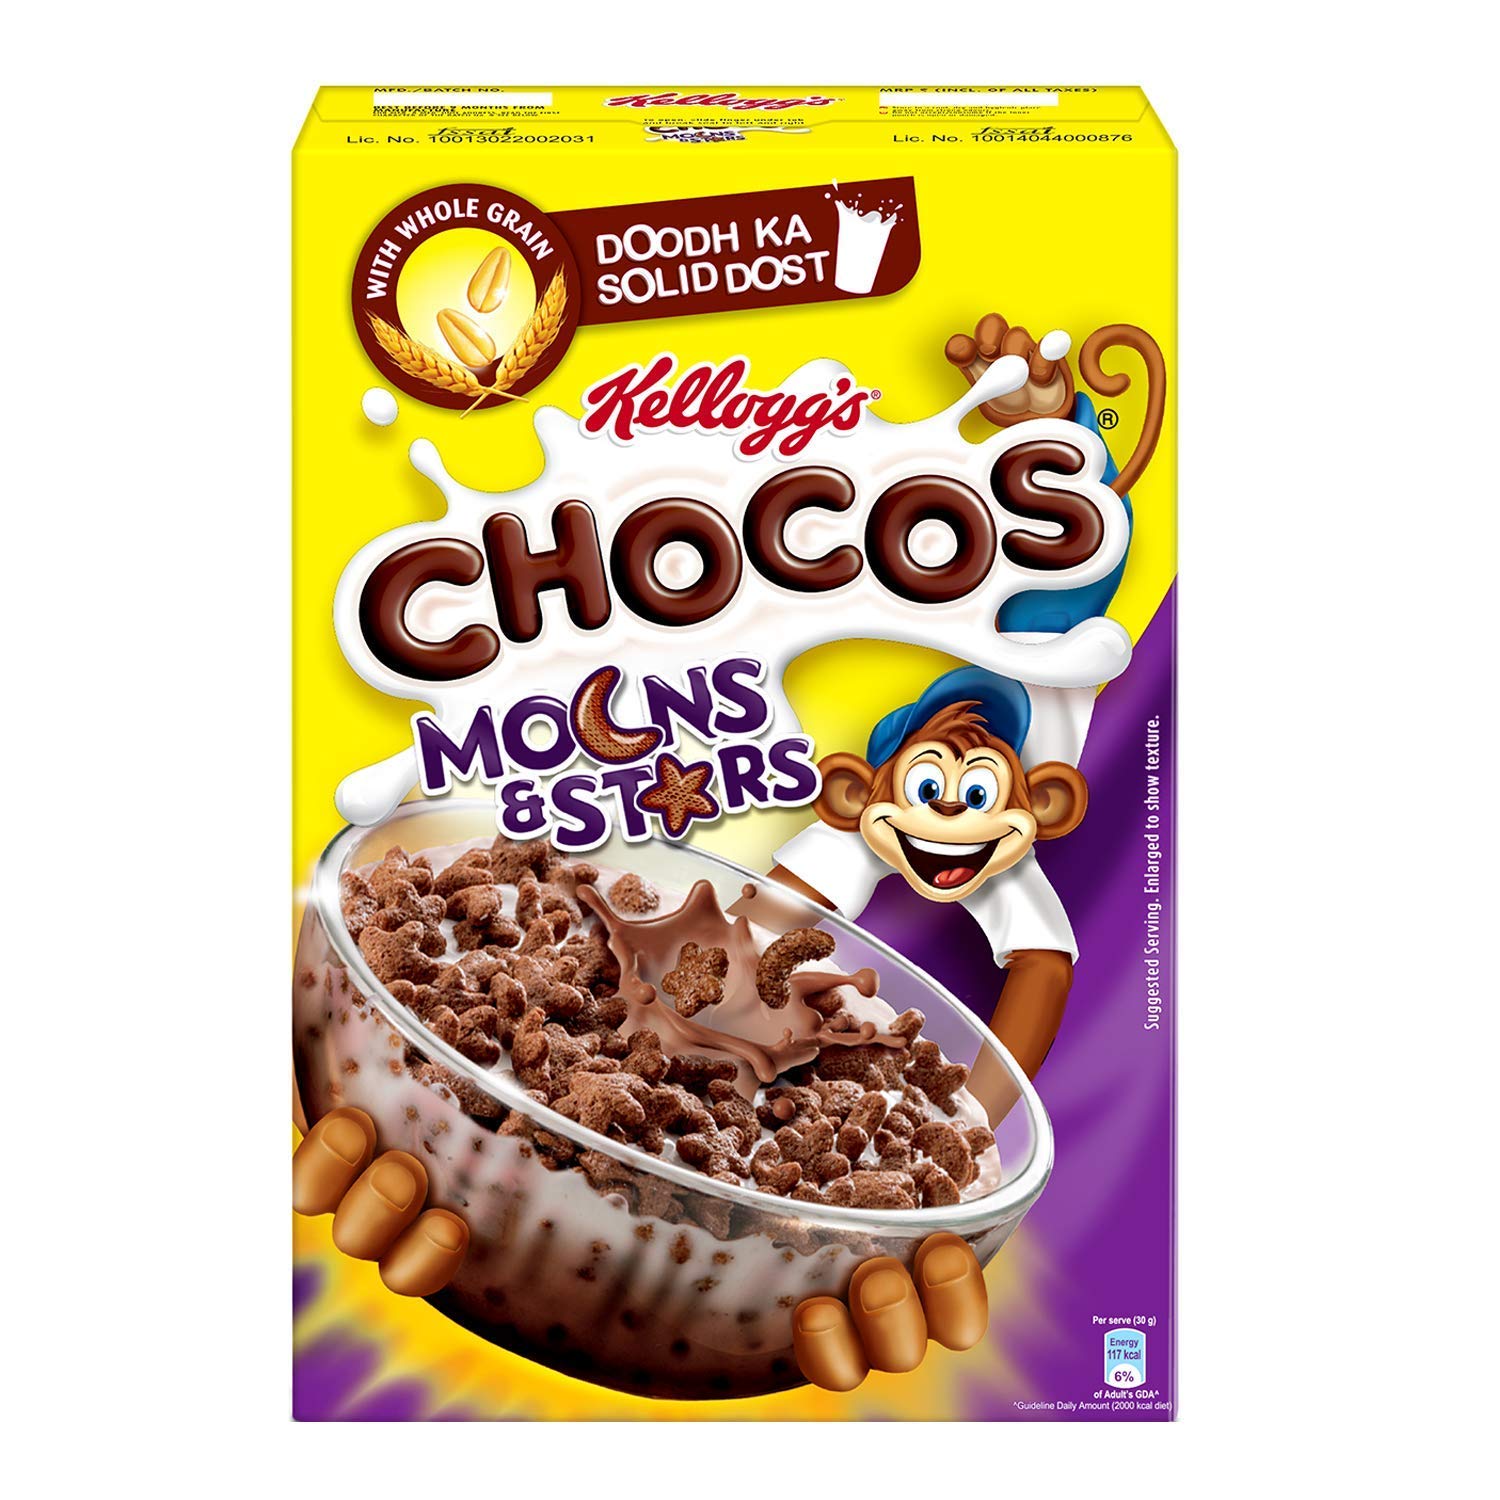 Kellogg S Chocos Moons And Stars My Healthy Breakfast Kellogg's chocos is a wheat based cereal with goodness of wholegrain and yummy chocolaty taste. kellogg s chocos moons and stars